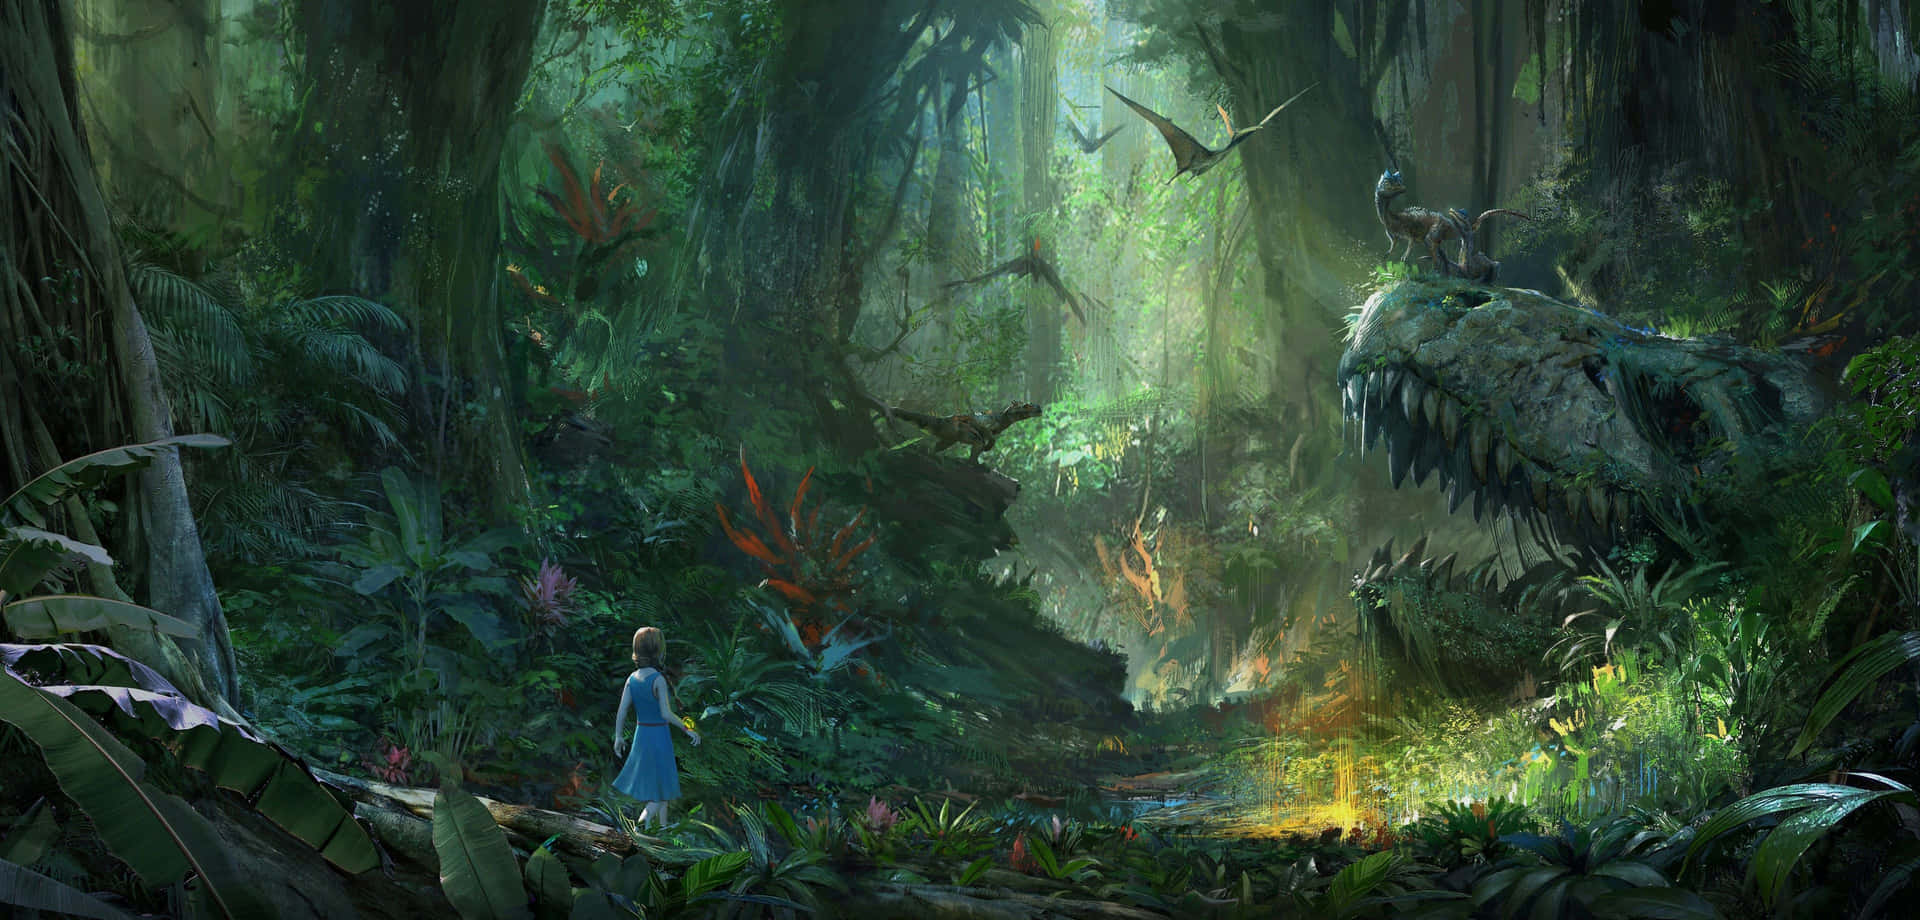 A Girl Is Walking Through A Jungle With Dinosaurs Wallpaper